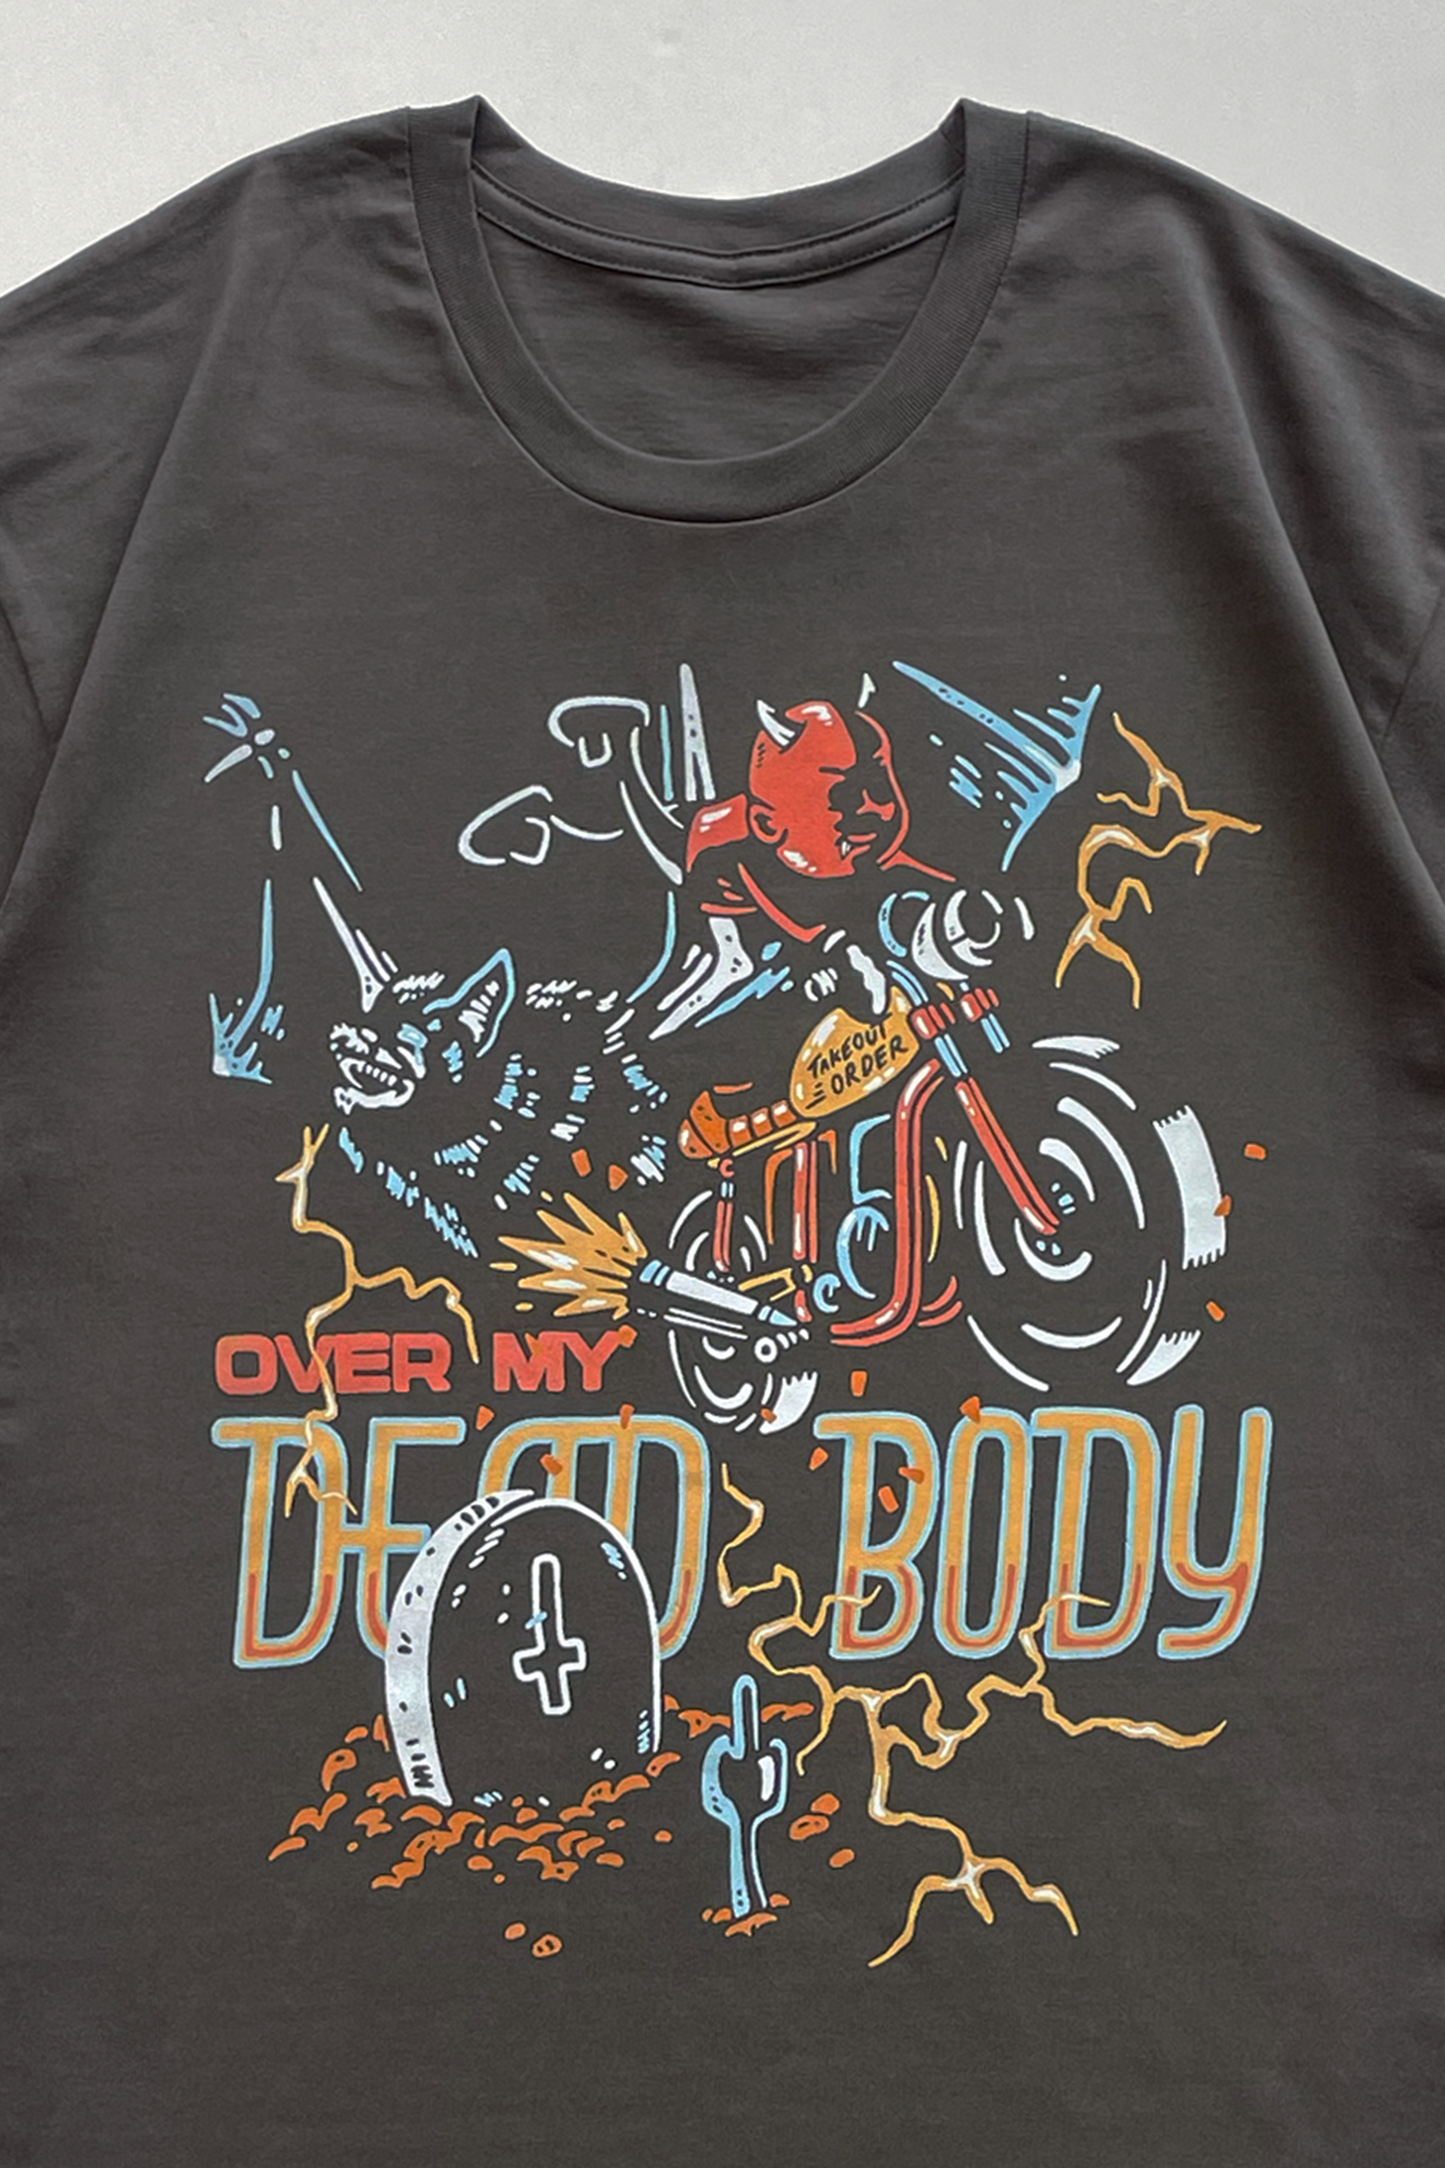 Over My Dead Body T-shirt